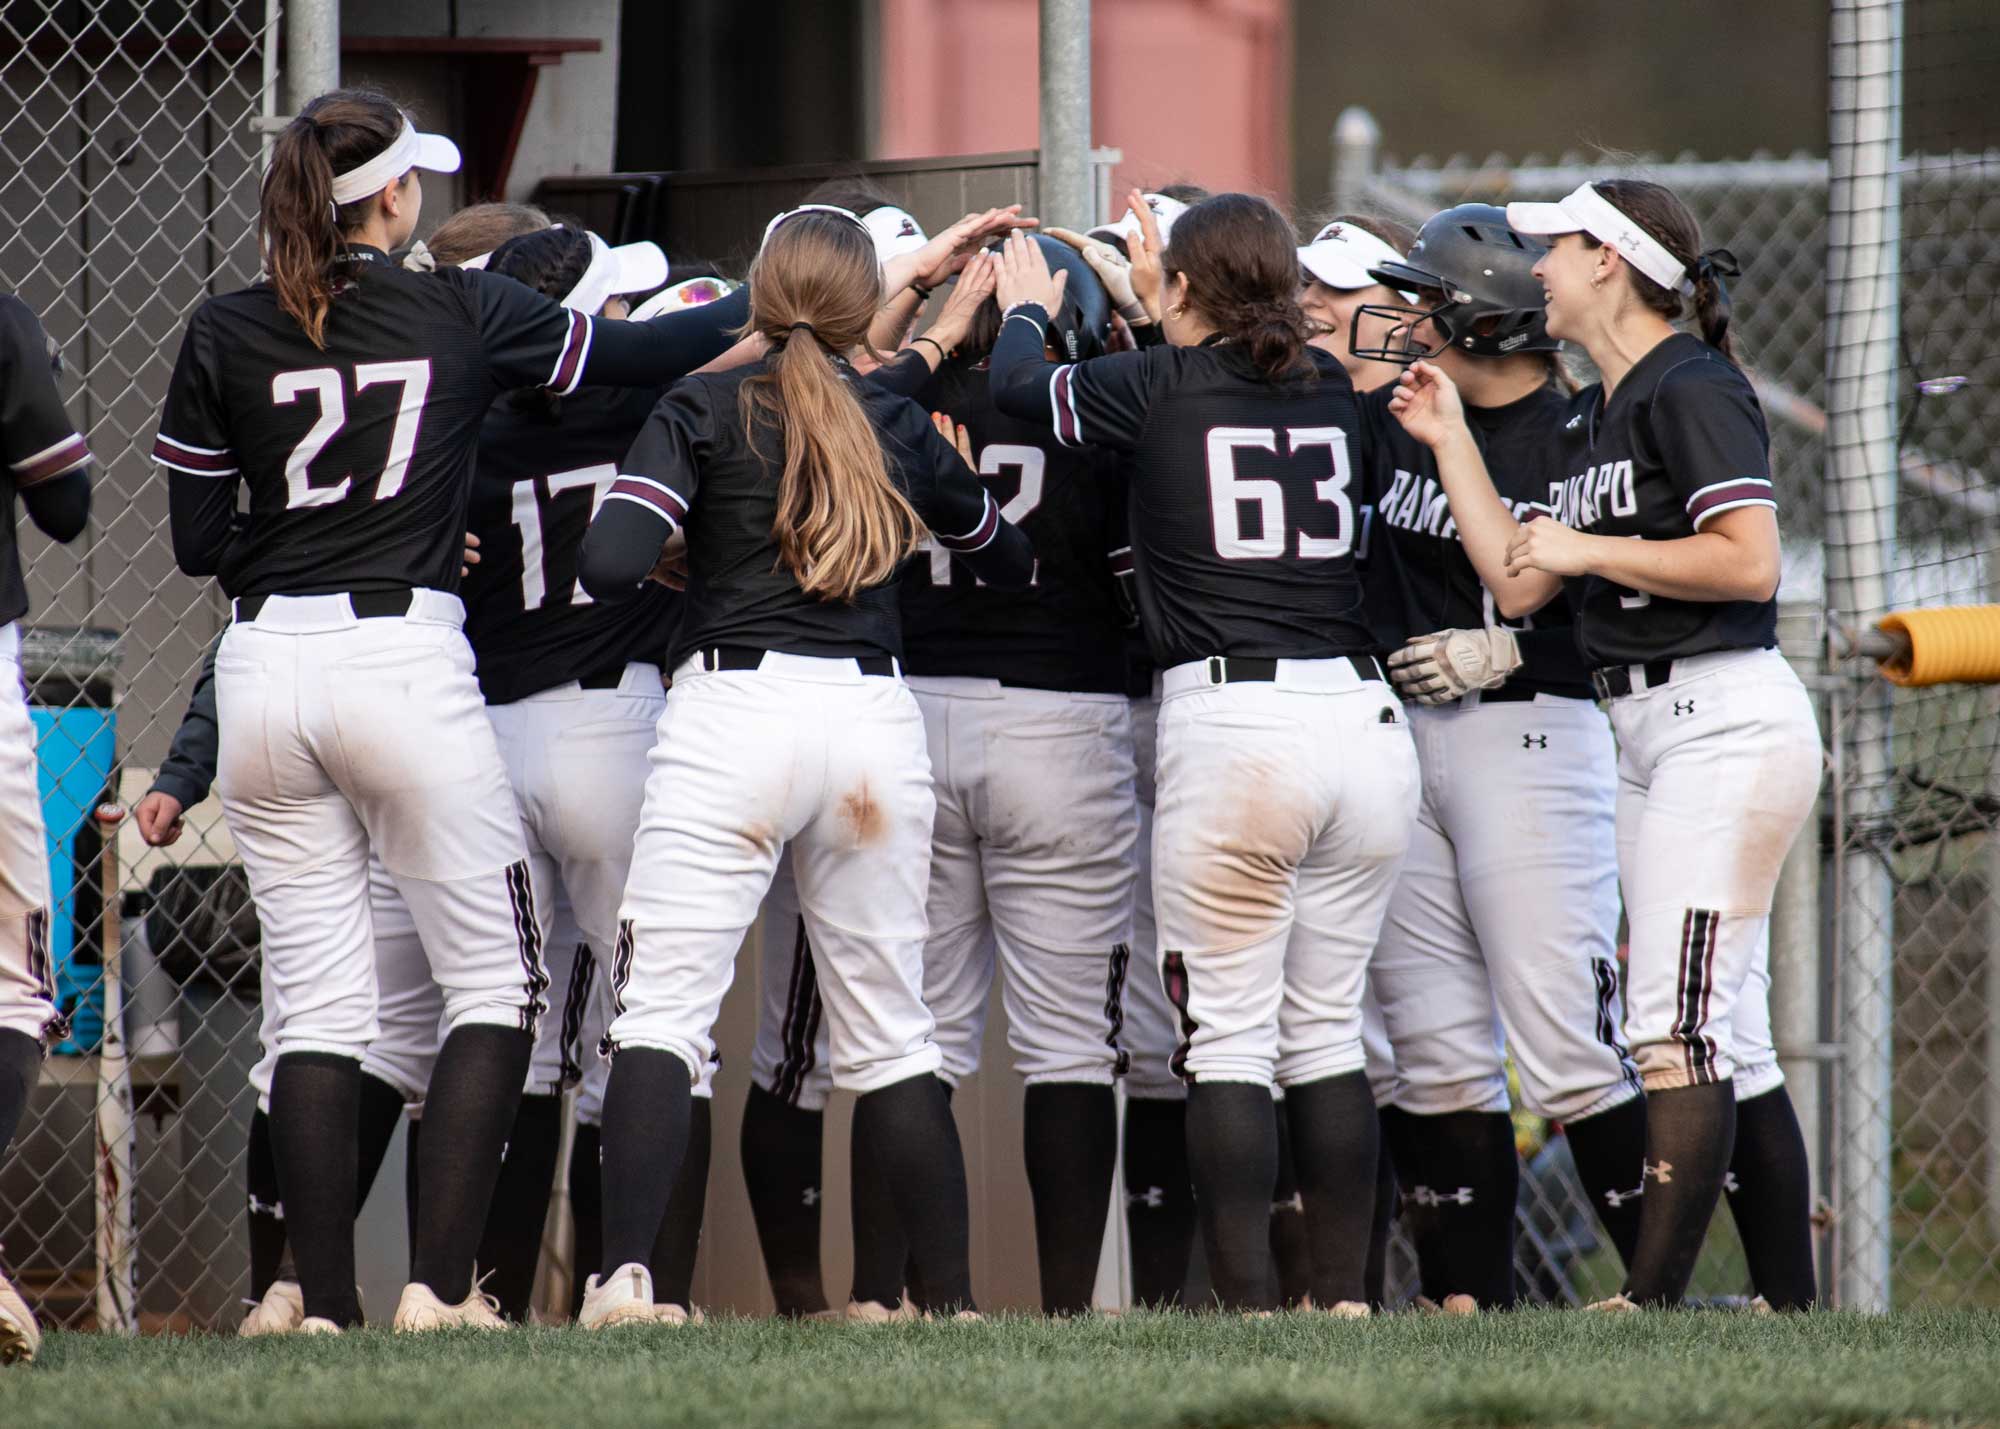 RCNJ Softball players in a group huddle